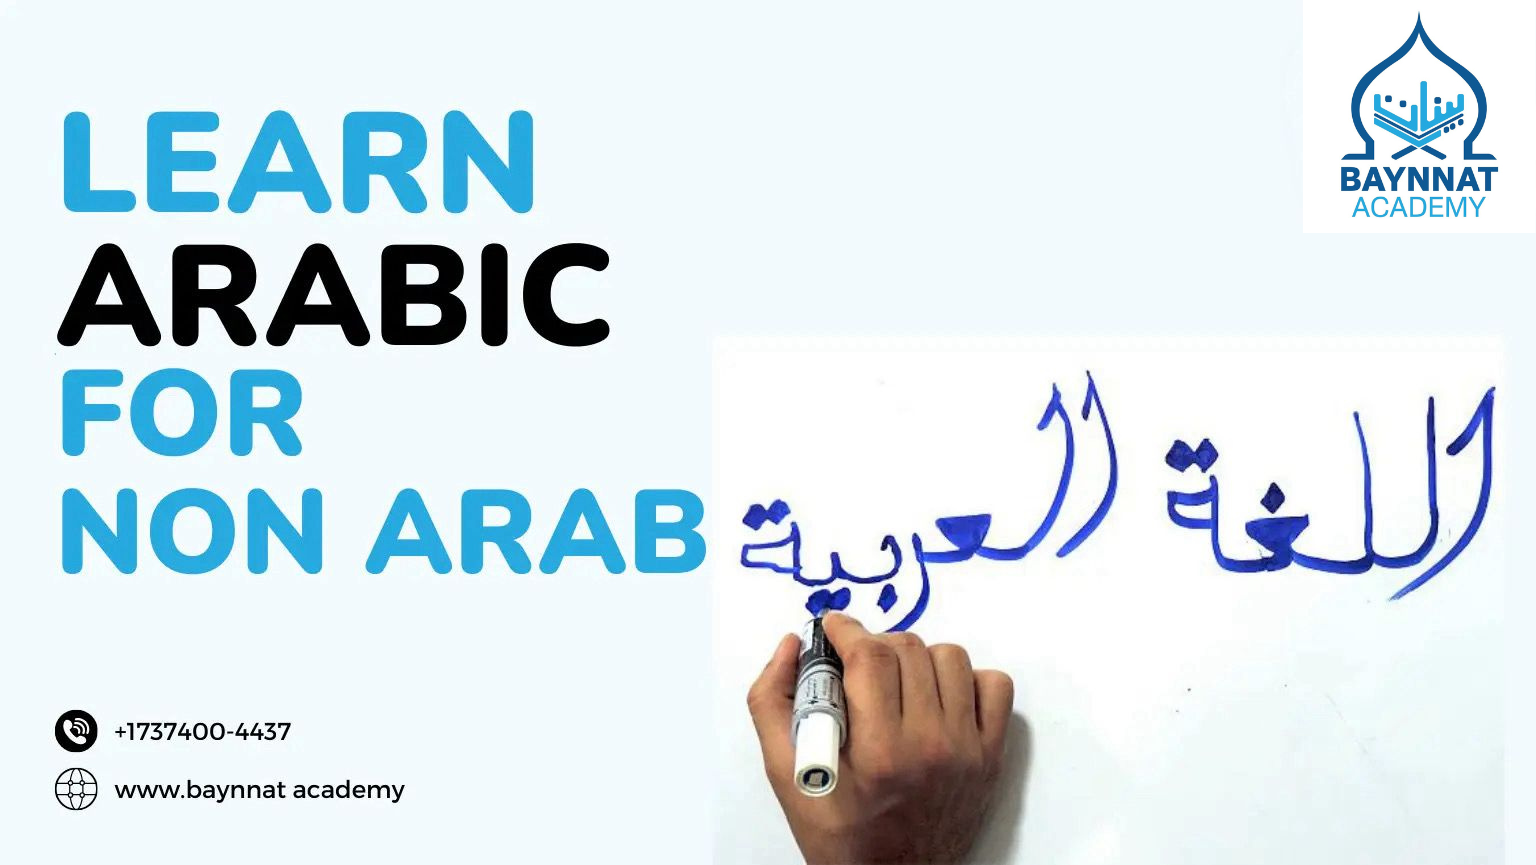 9 steps to learn Arabic for non-Arabic speakers fast and easy